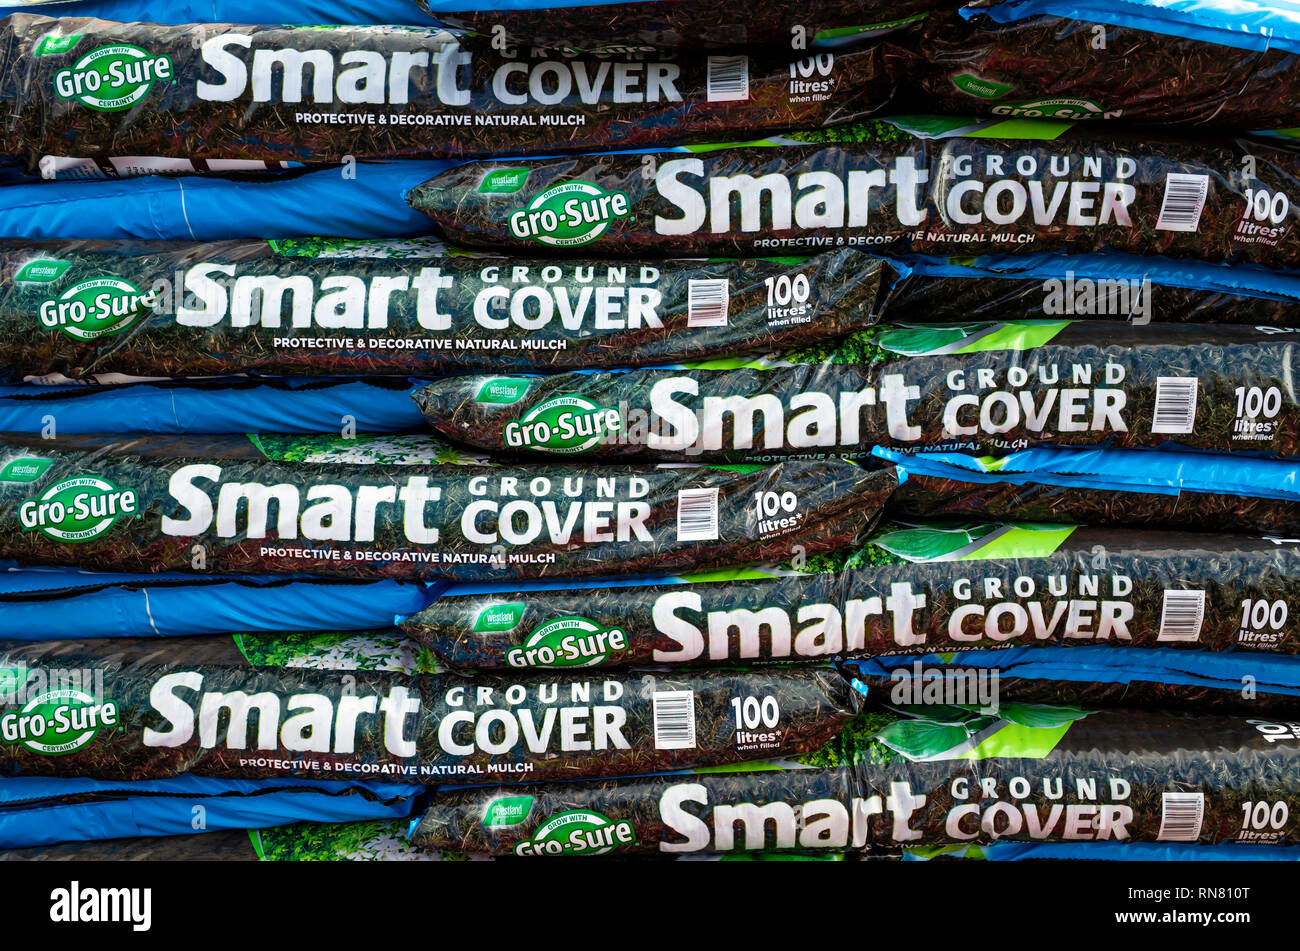 A stack of bags of Smart Ground Cover decorative mulch in a garden centre Stock Photo